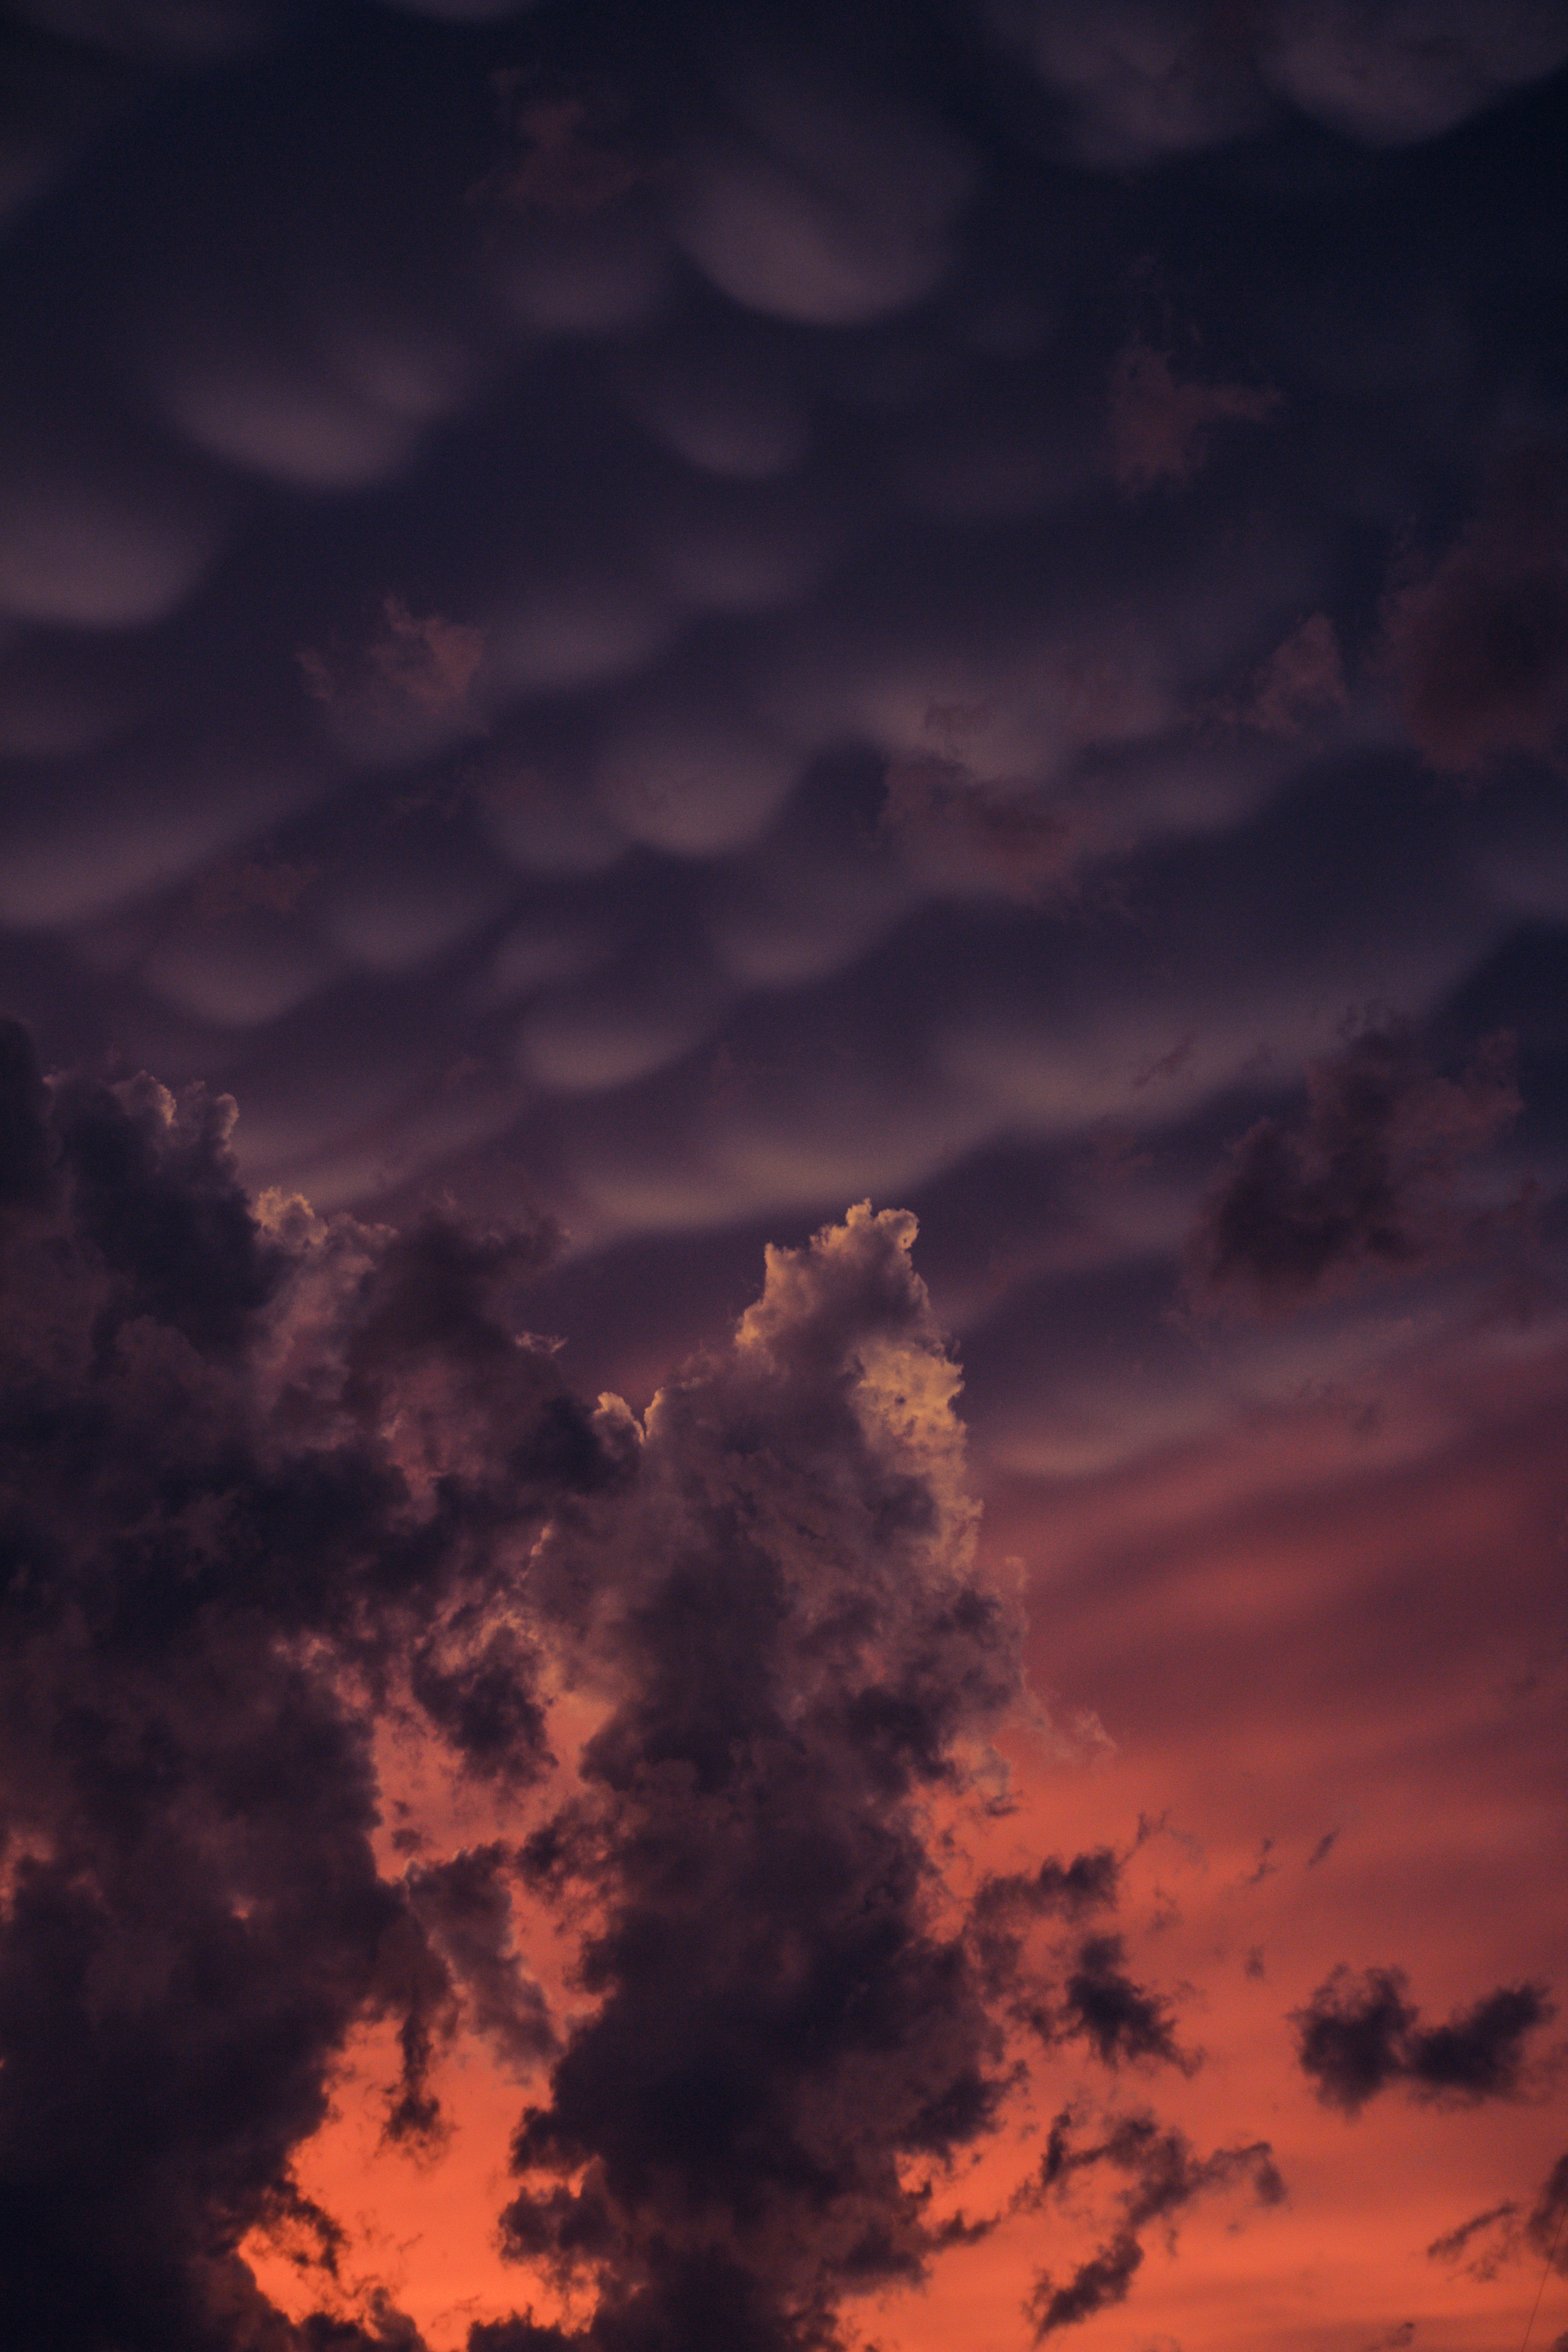 68792 Screensavers and Wallpapers Porous for phone. Download nature, sky, night, clouds, dark, porous pictures for free